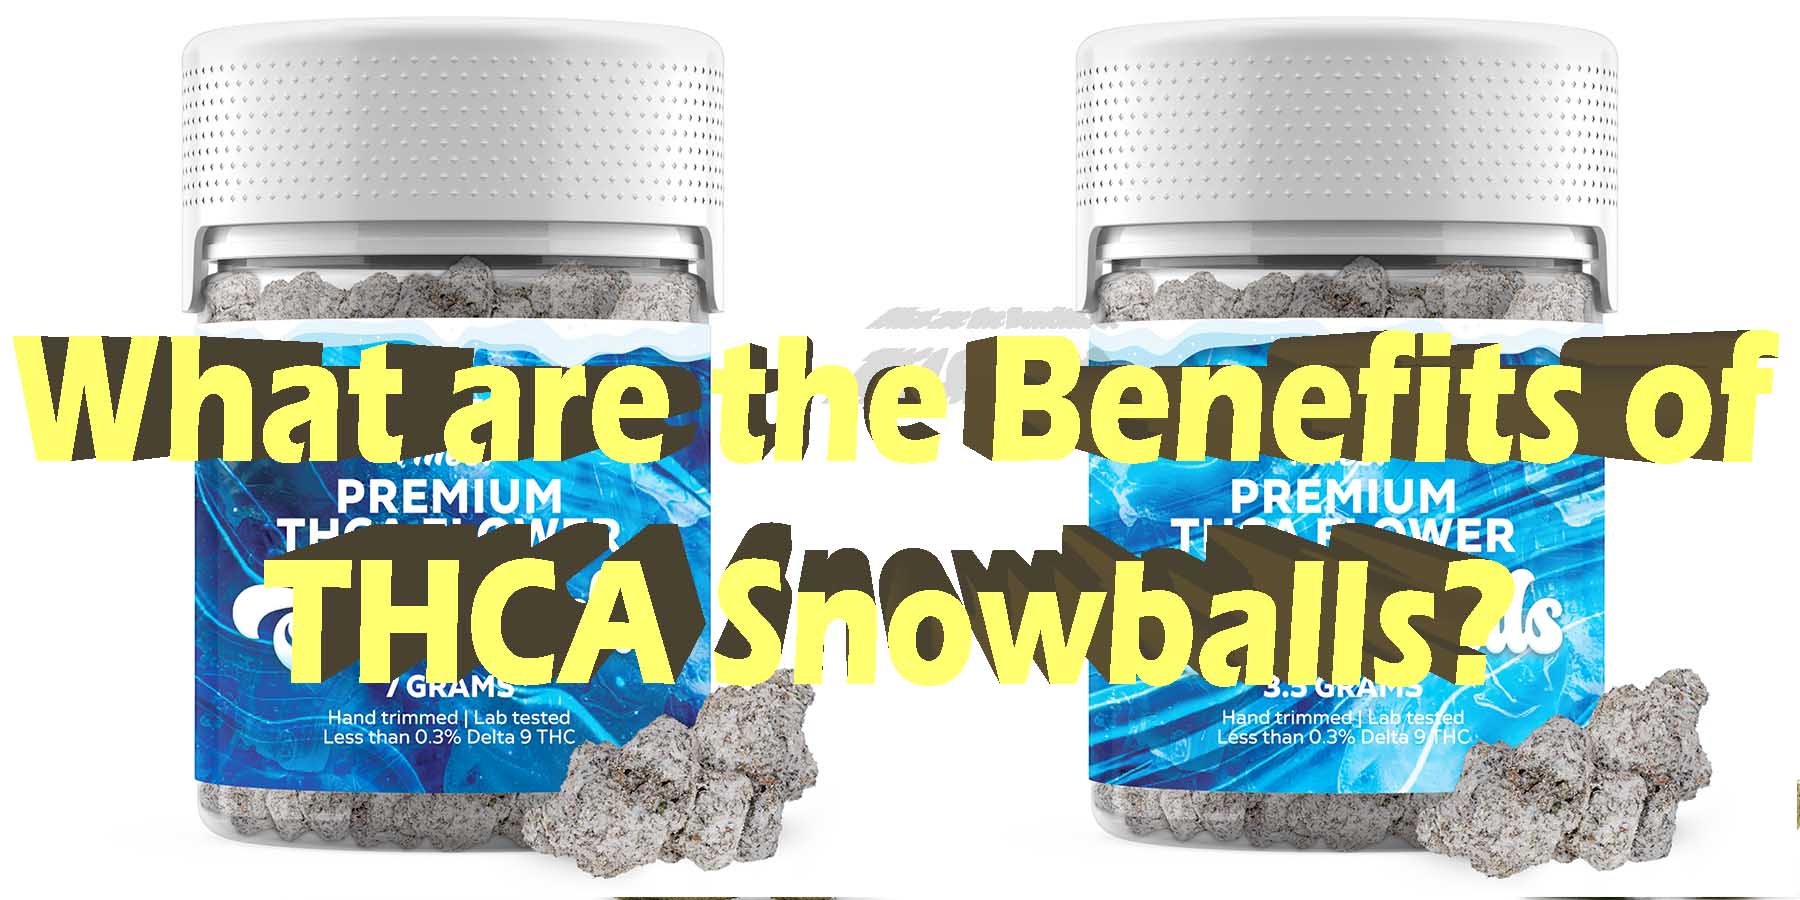 What are the Benefits of THCA Snowballs LowestPrice Coupon Discount For Smoking Best High Smoke Shop Online Near Me Online Smoke Shop StrongestBrand Best Smoke Bloomz